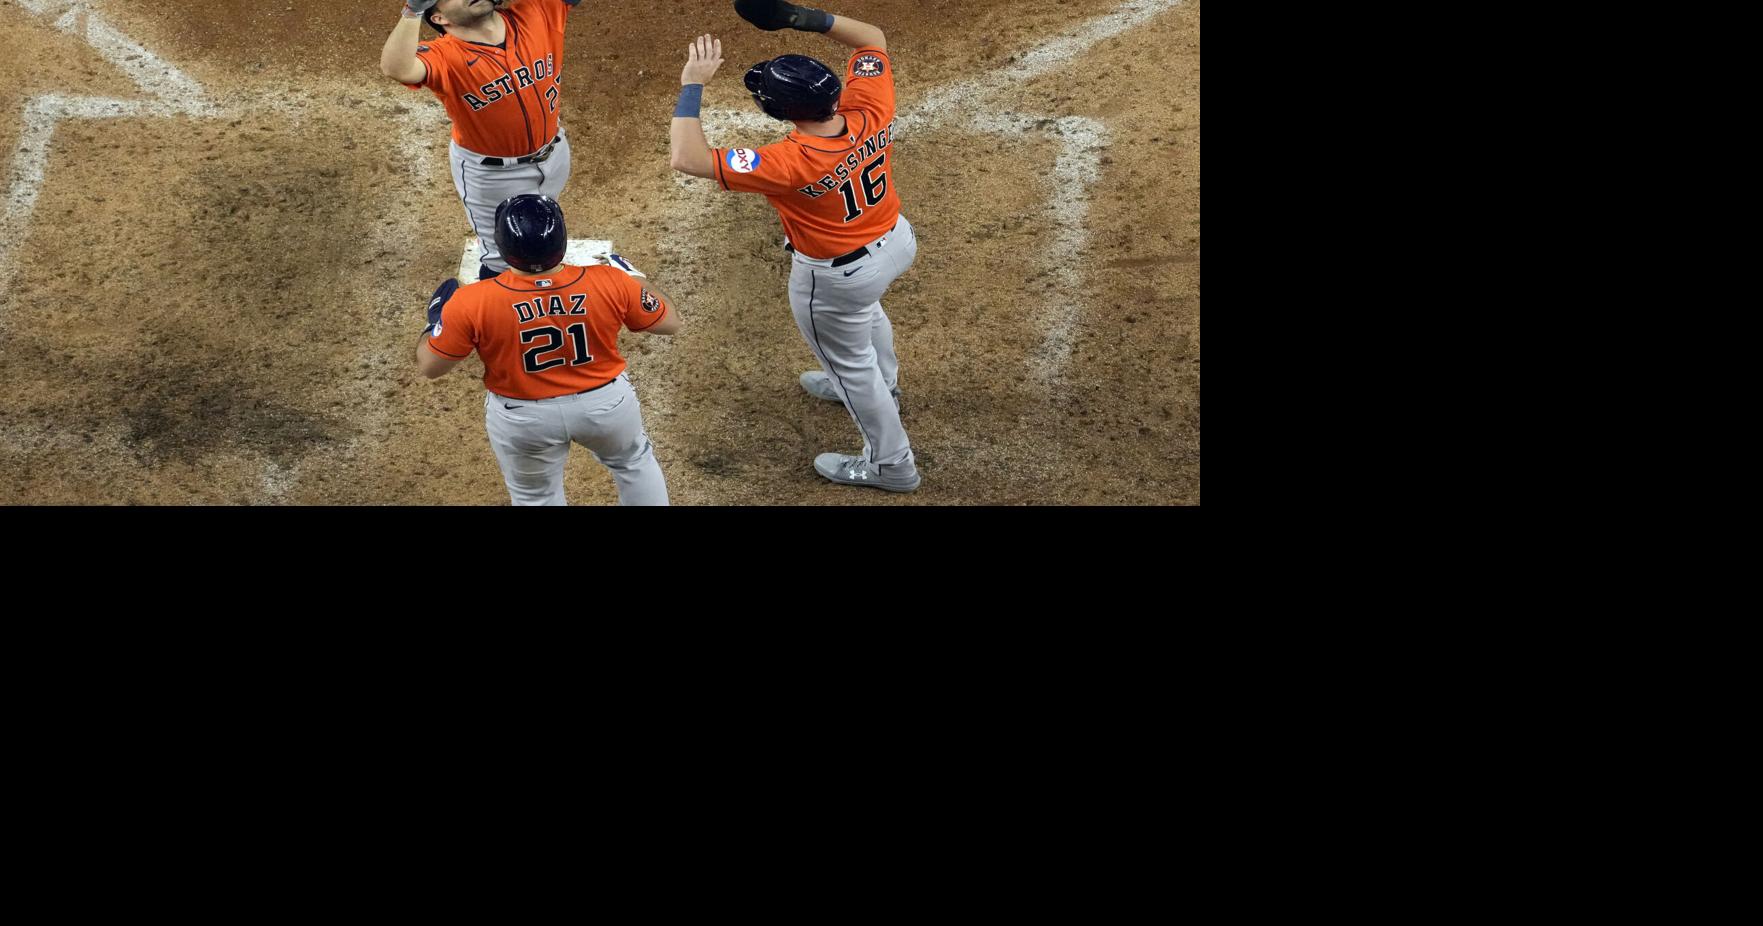 Altuve hits HR, Astros beat Rays 4-0 to clinch AL West title